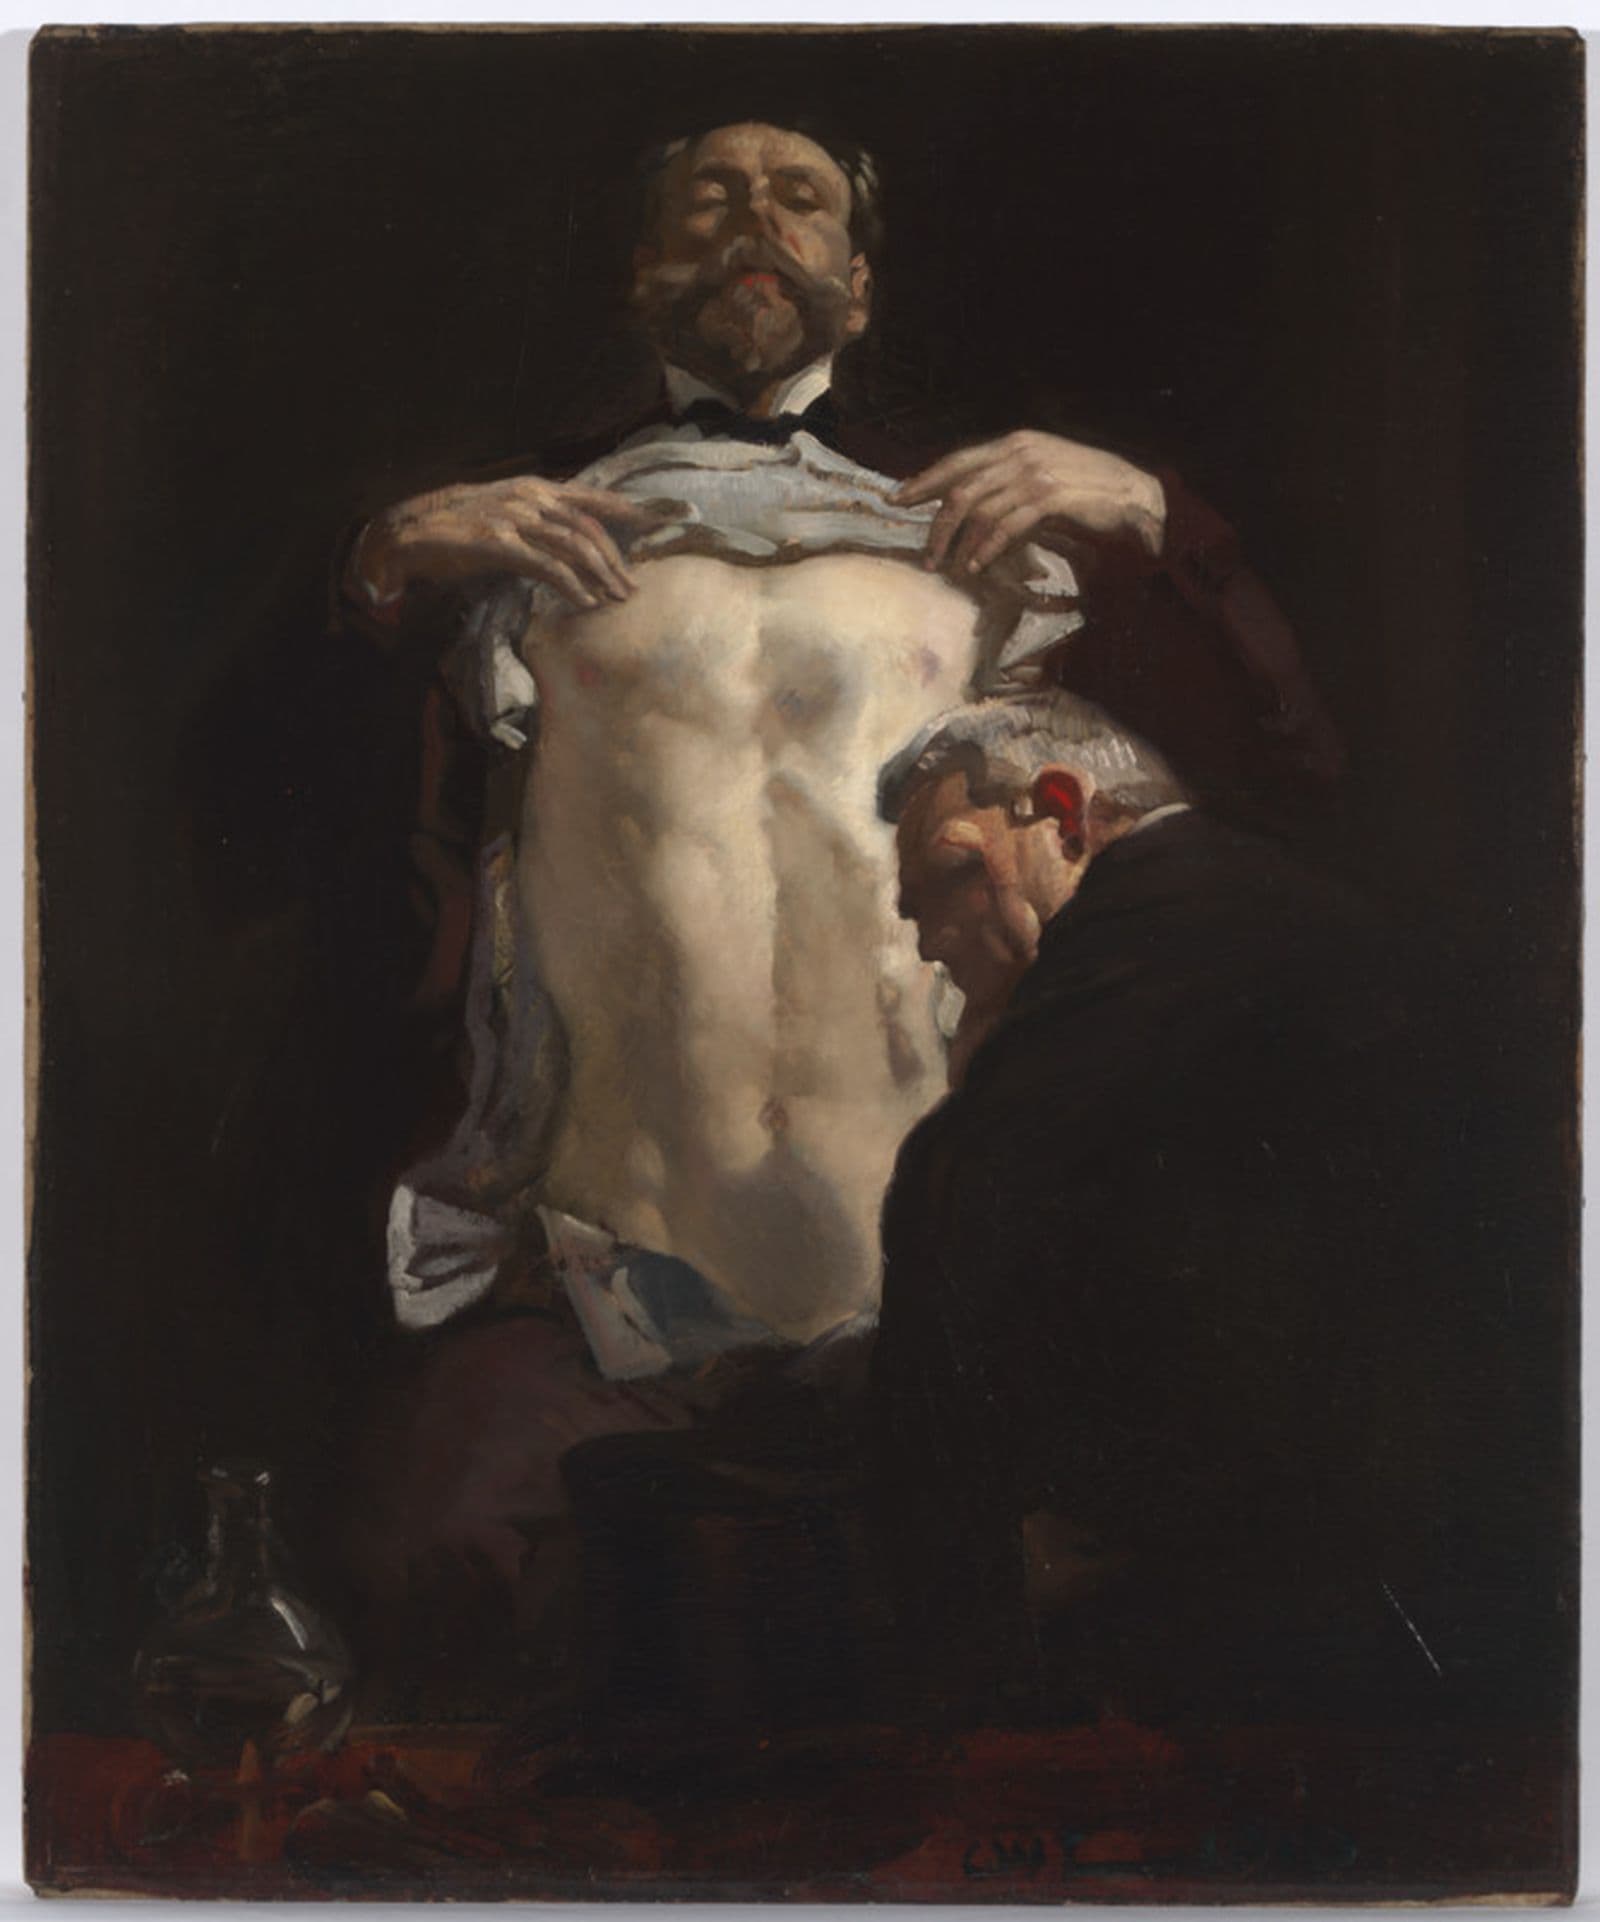 Painting of two men. One is facing the viewer holding his shirt up to expose his torso. The other sits with his back to the viewer, looking over his shoulder slightly